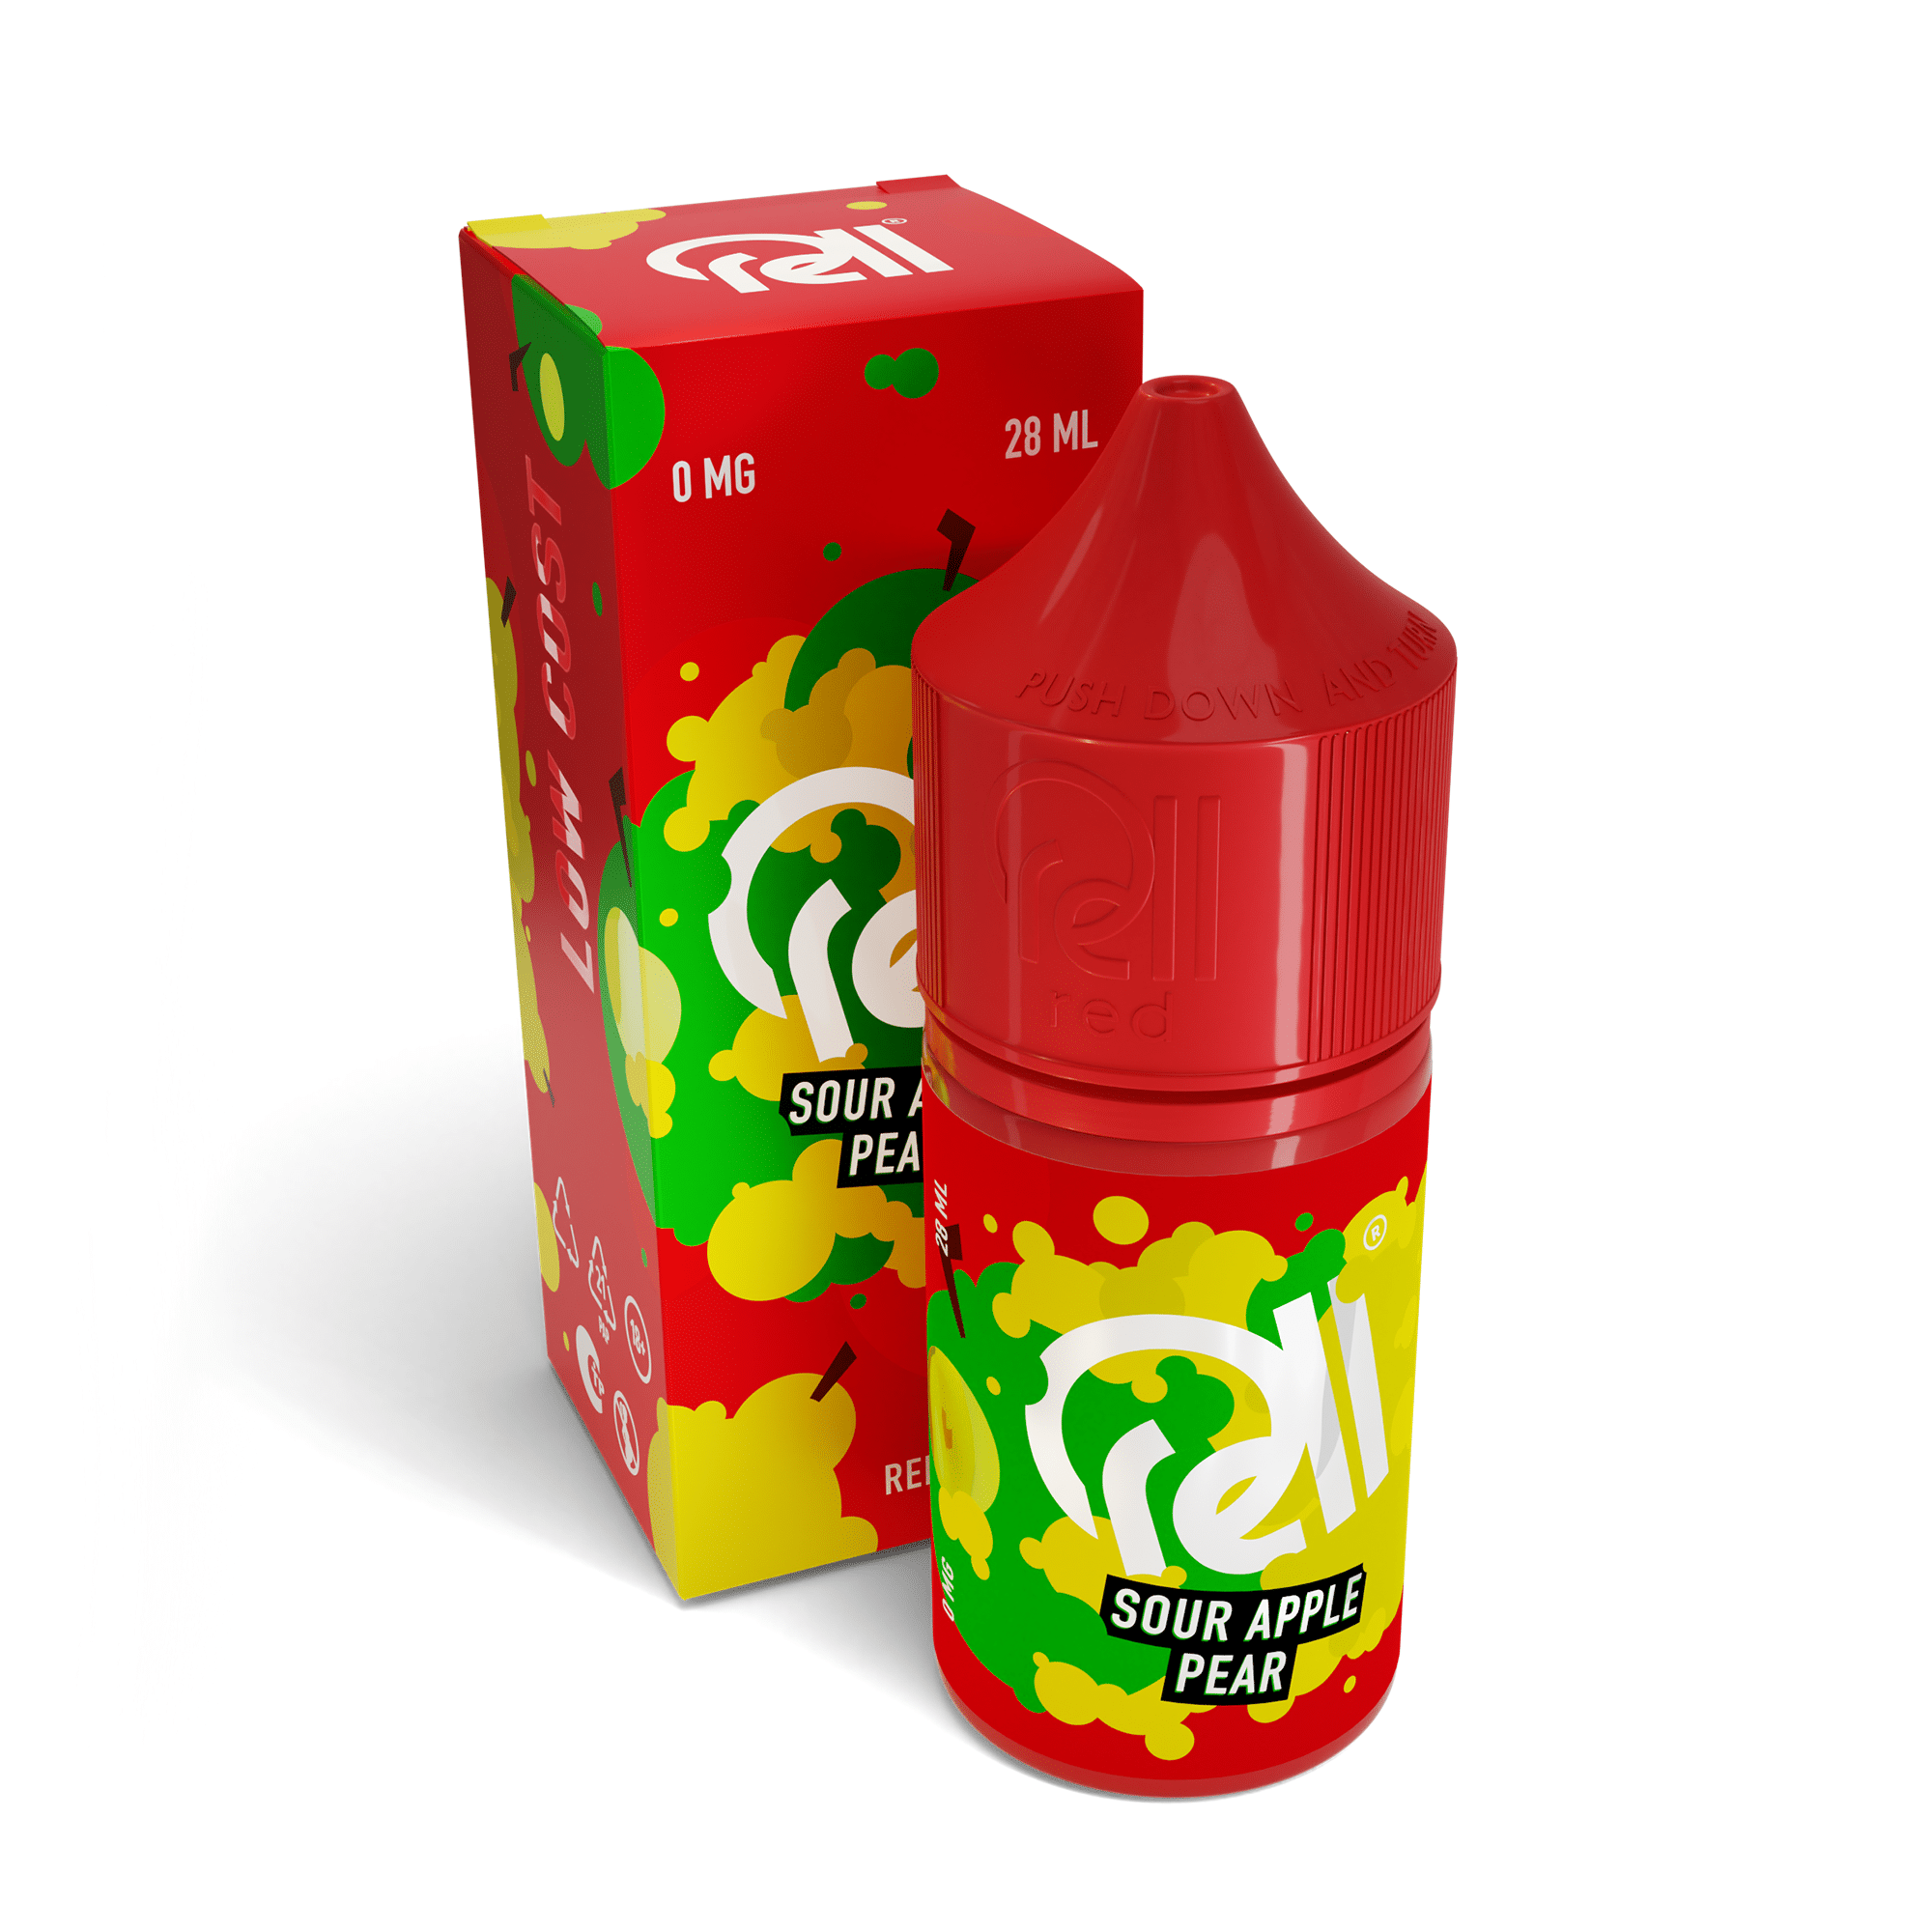 Жидкость Rell Low Cost - Sour Apple Pear 28 мл 0 мг